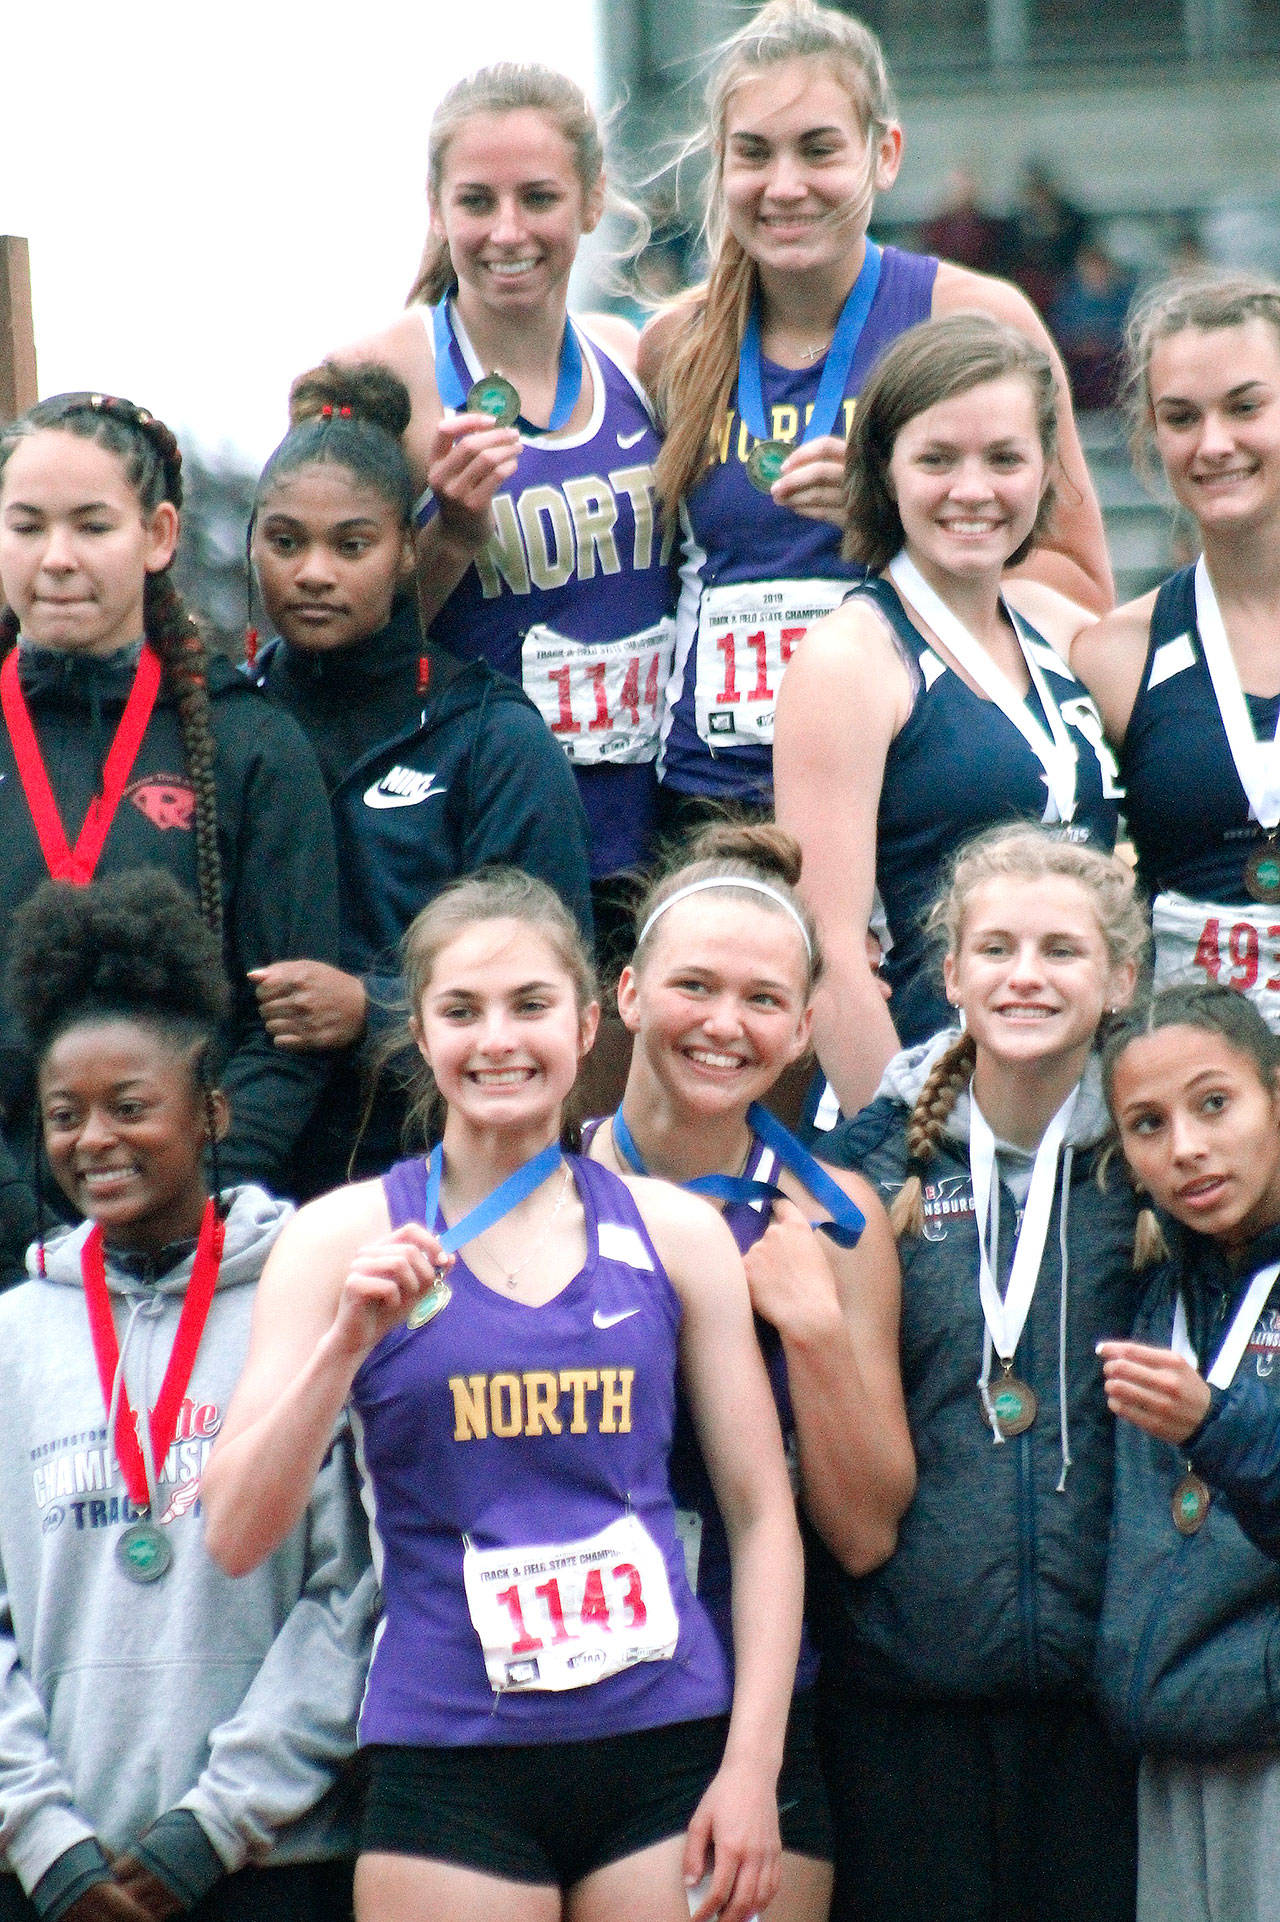 North Kitsap’s 4x200 relay team of Alyssa Cullen, Madeline Pruden, Emerson Bollert and Raelee Moore captured a state title. (Mark Krulish/Kitsap News Group)